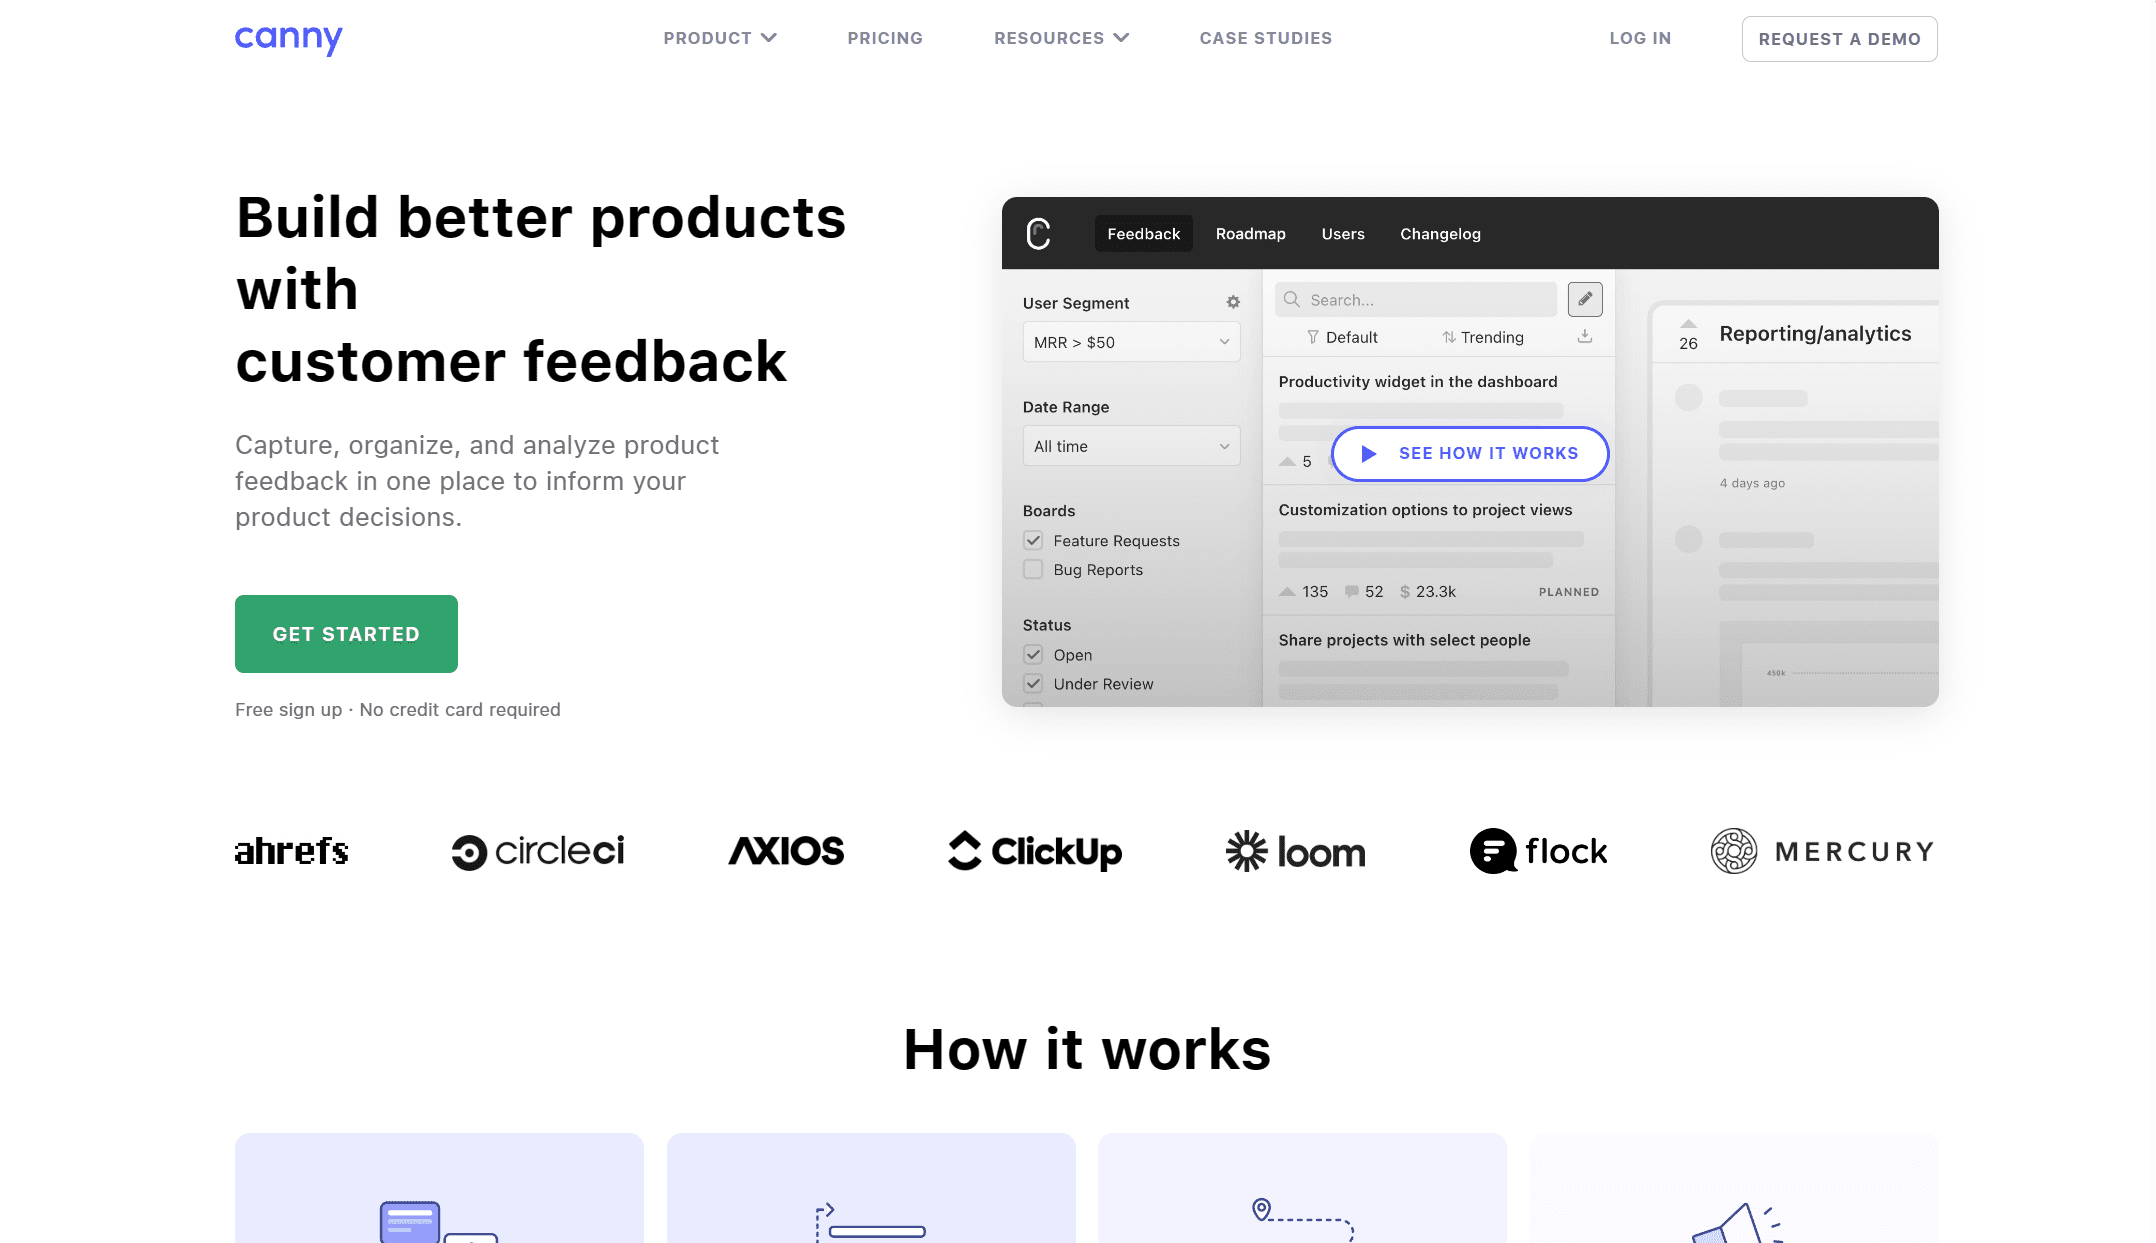 Canny is another great customer feedback software that helps you build better products